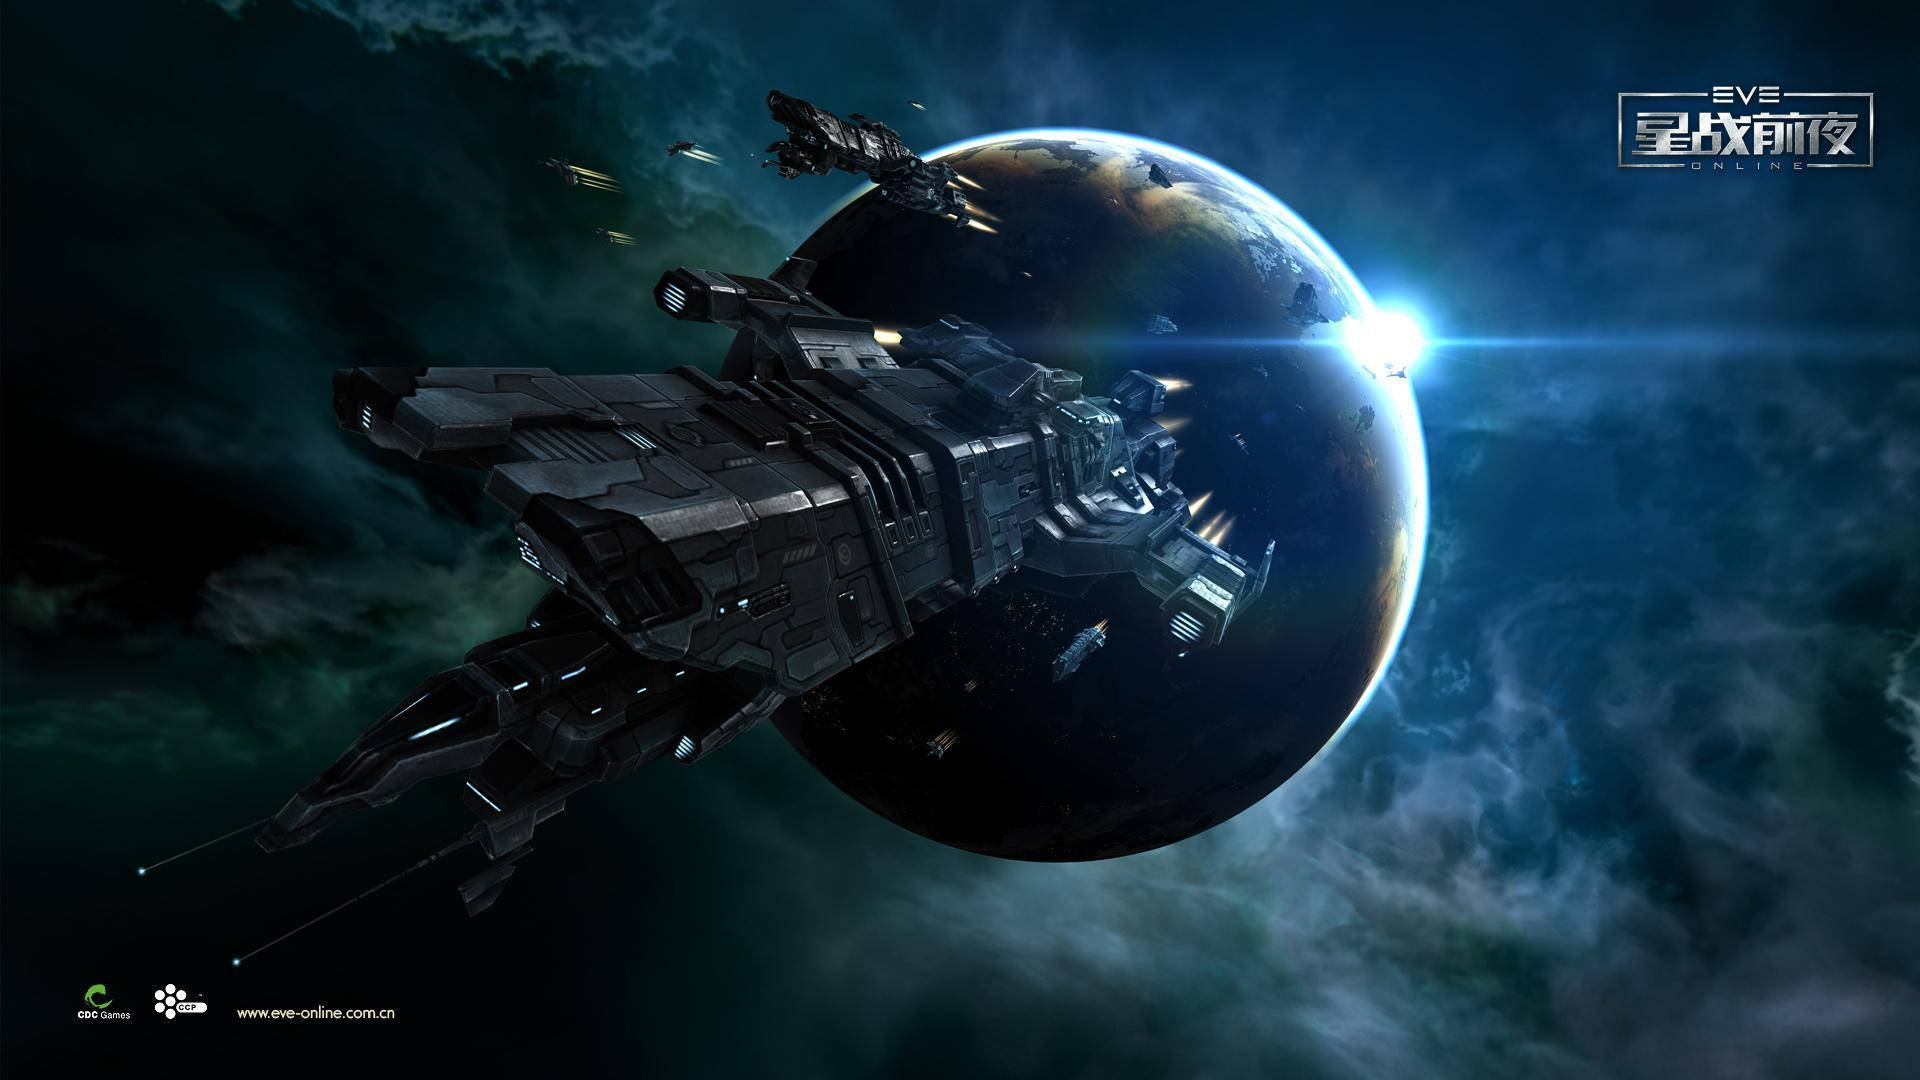 Planet and Spaceships On EVE Online Wallpaper